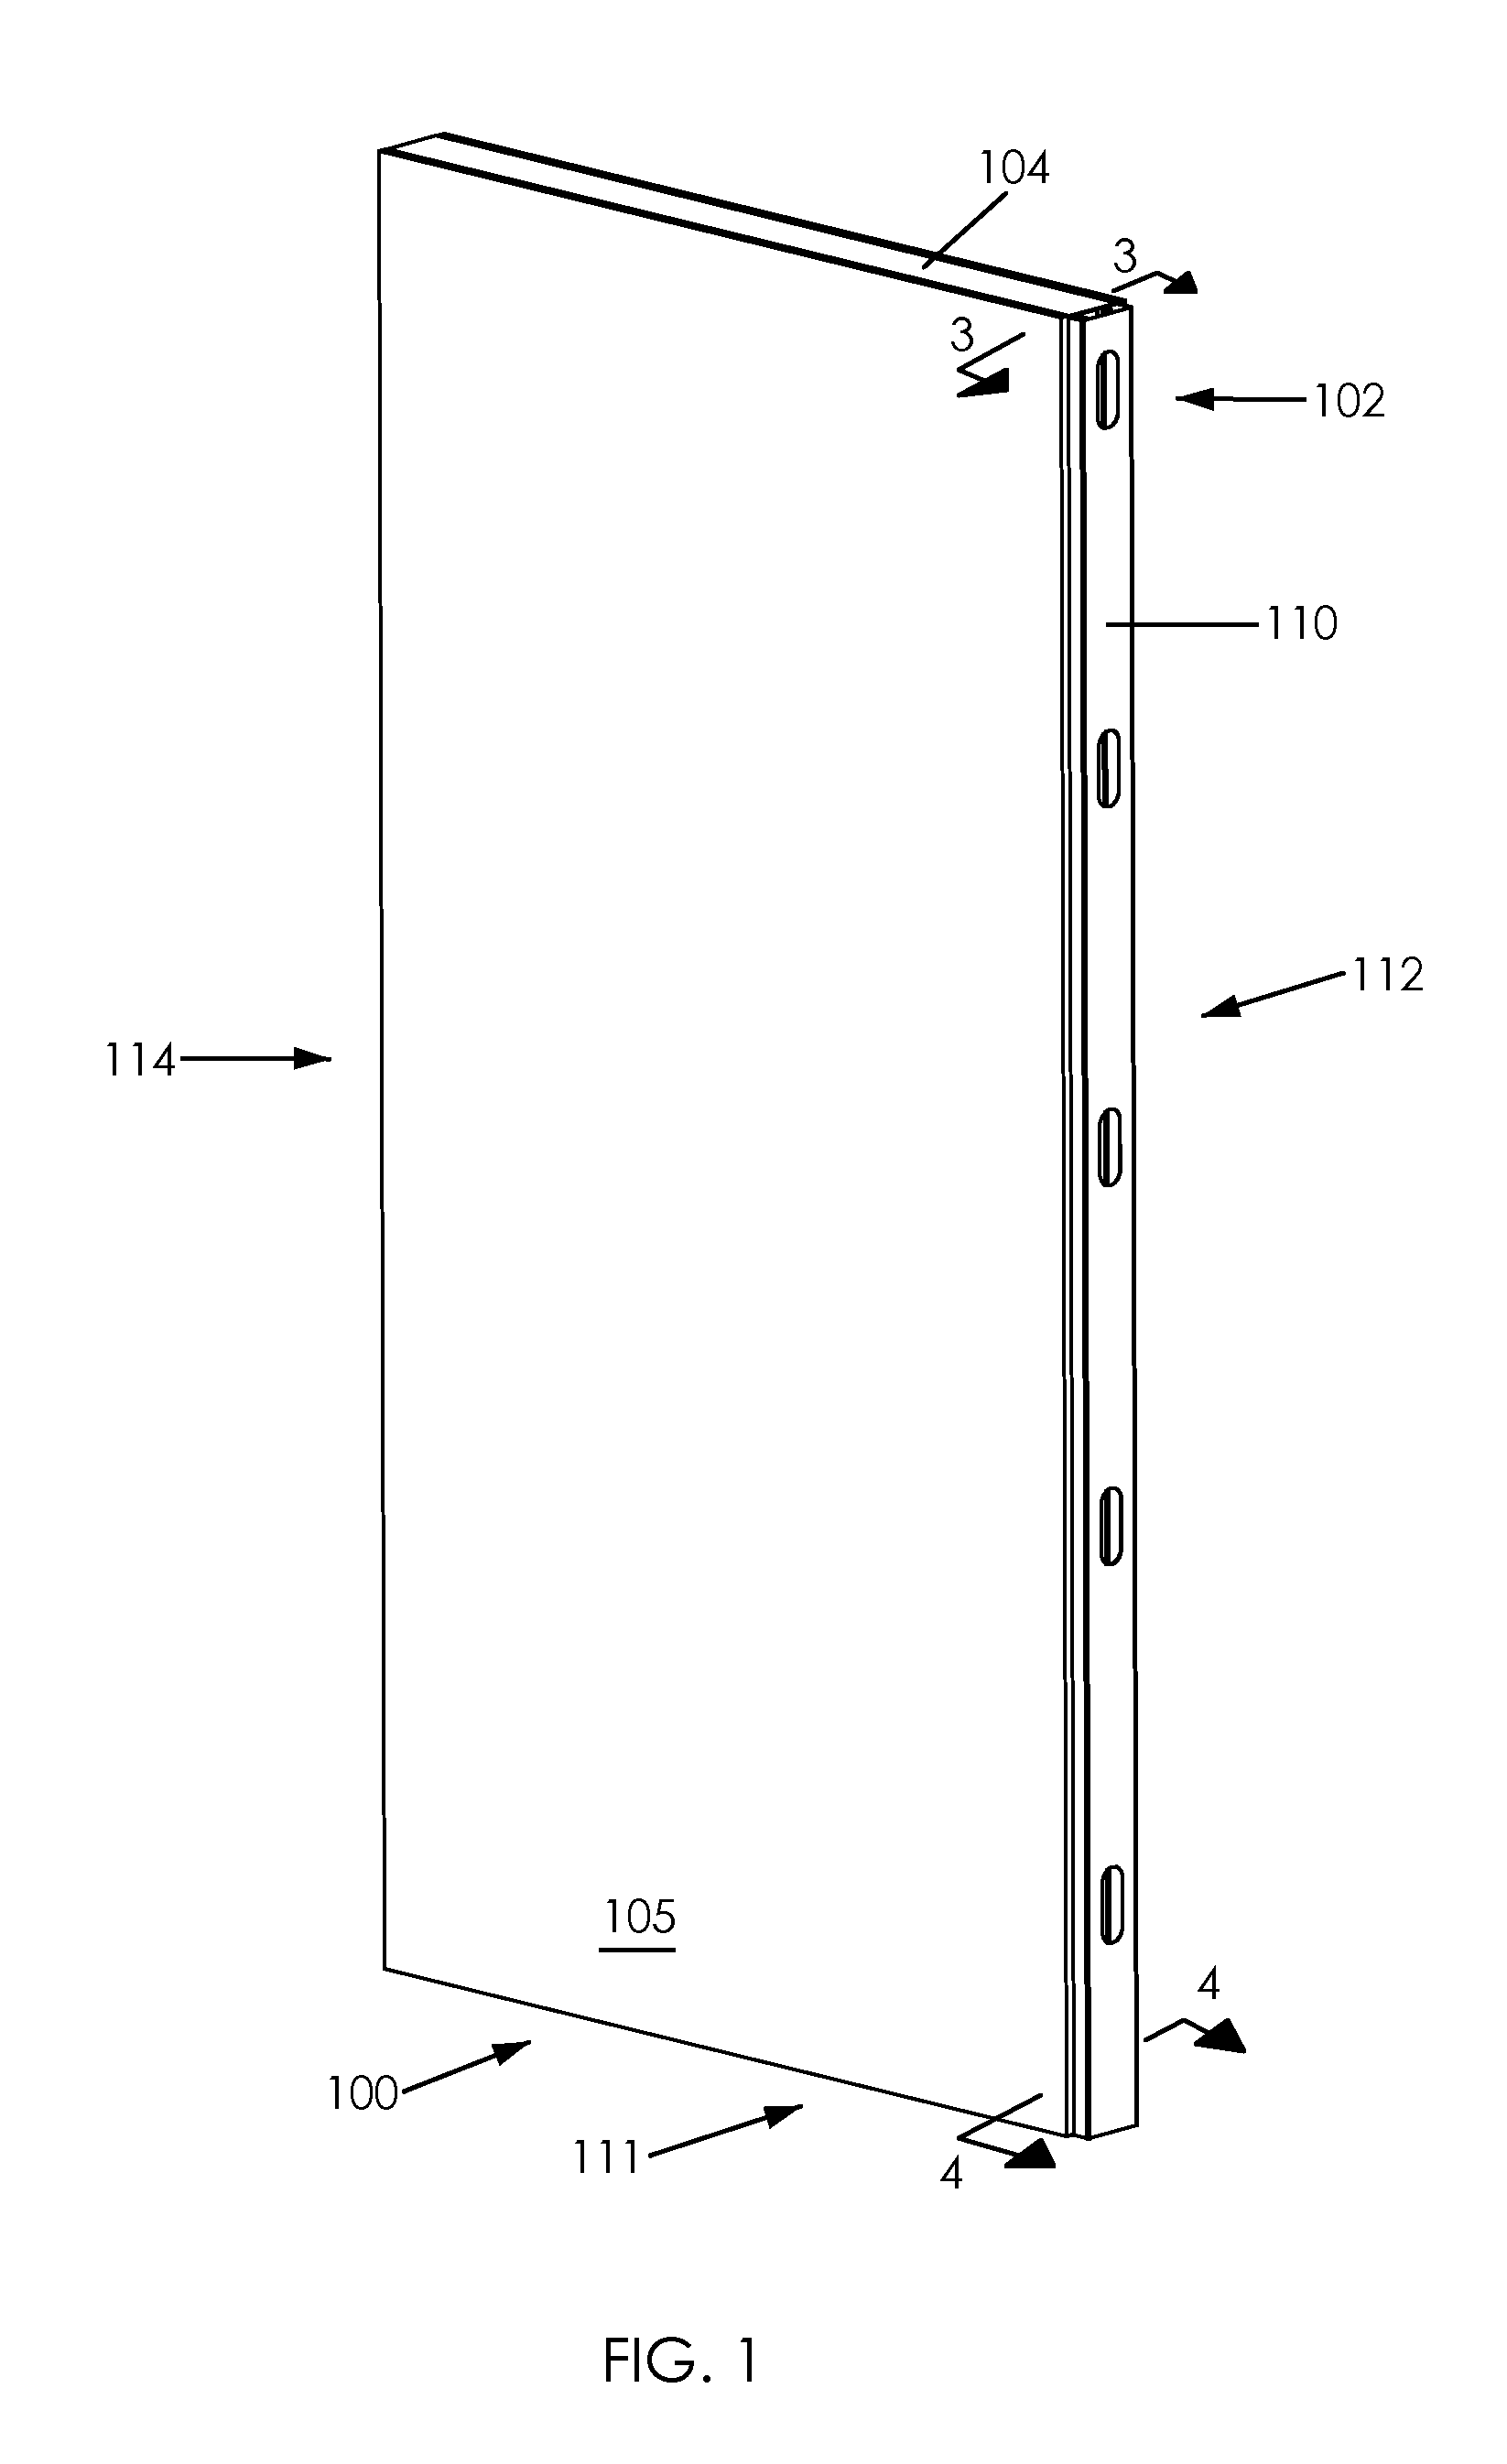 Structural wall panel for use in light-frame construction and method of construction employing structural wall panels